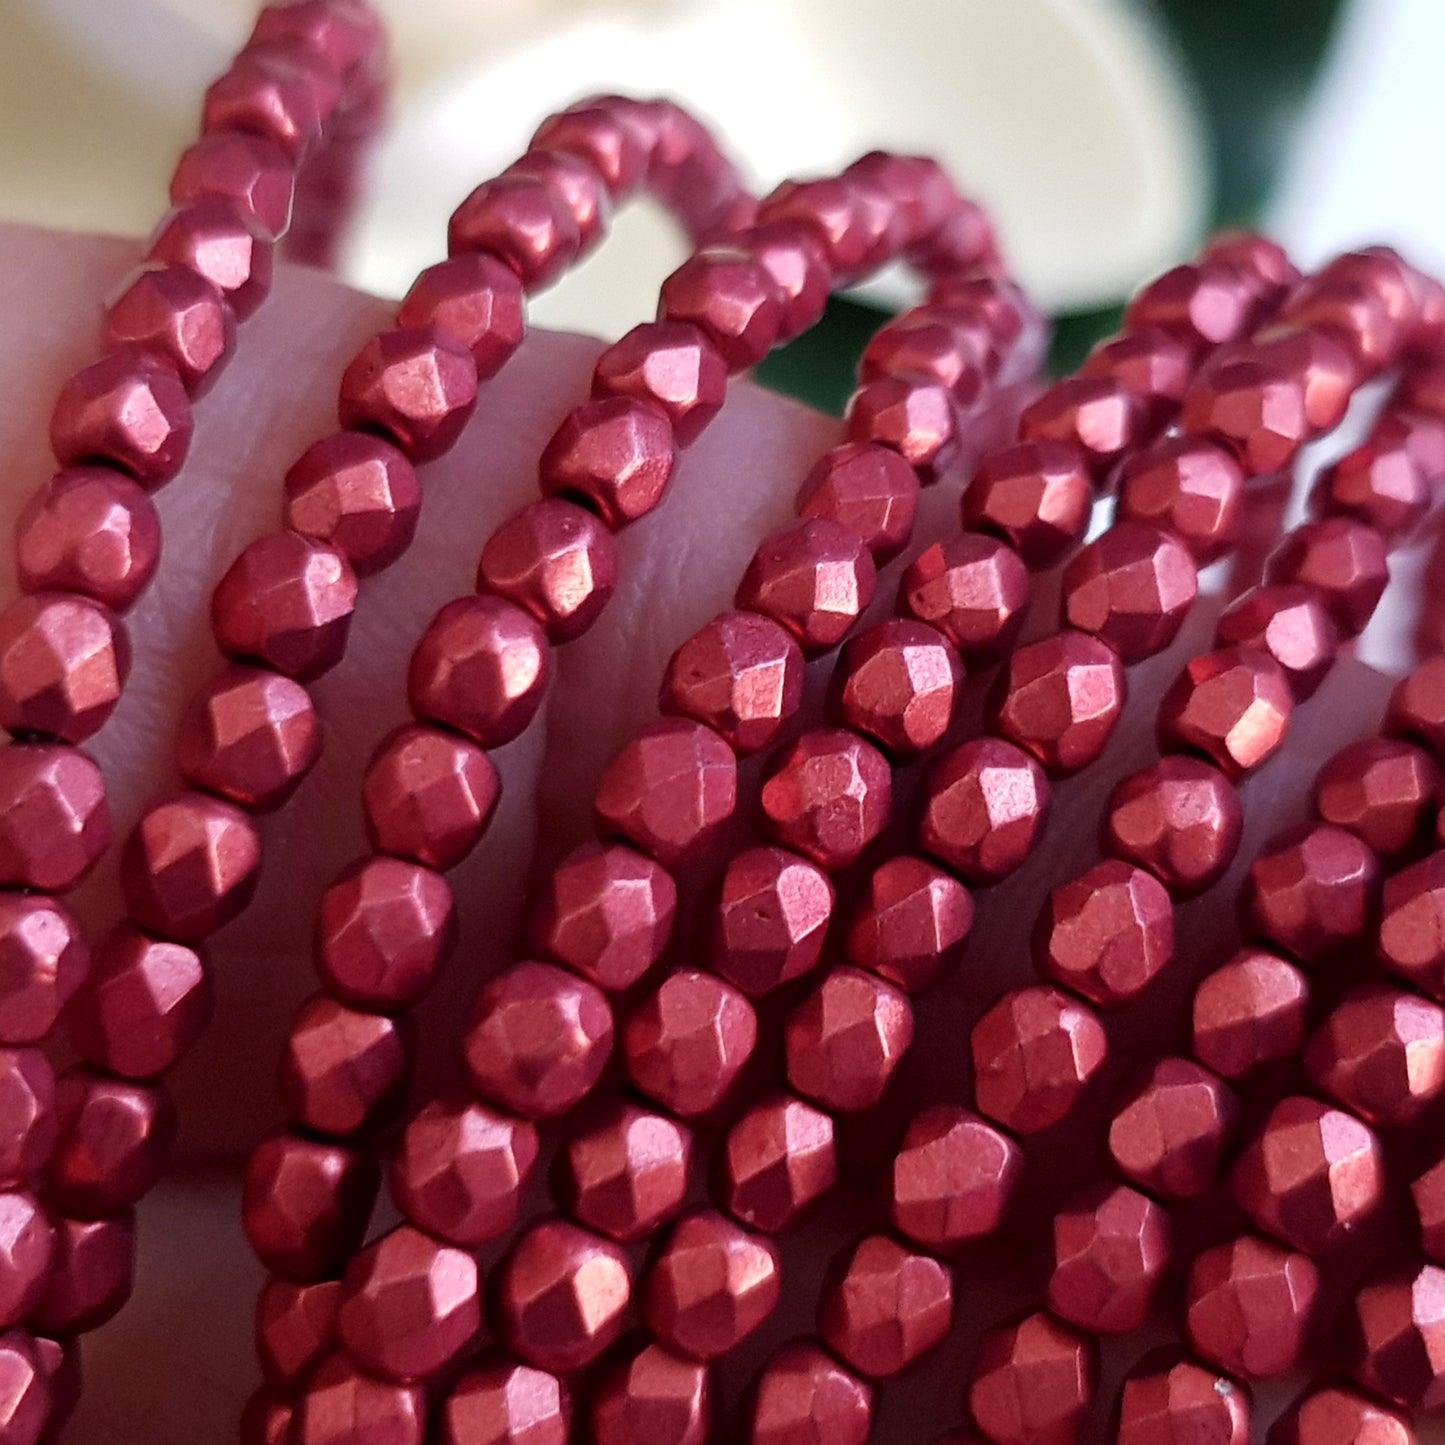 Czech Fire Polished 50 Bead Strand - Suede Gold Samba Red 3mm Round Faceted  |  FP-08A07-CB-03 | Beading Supply